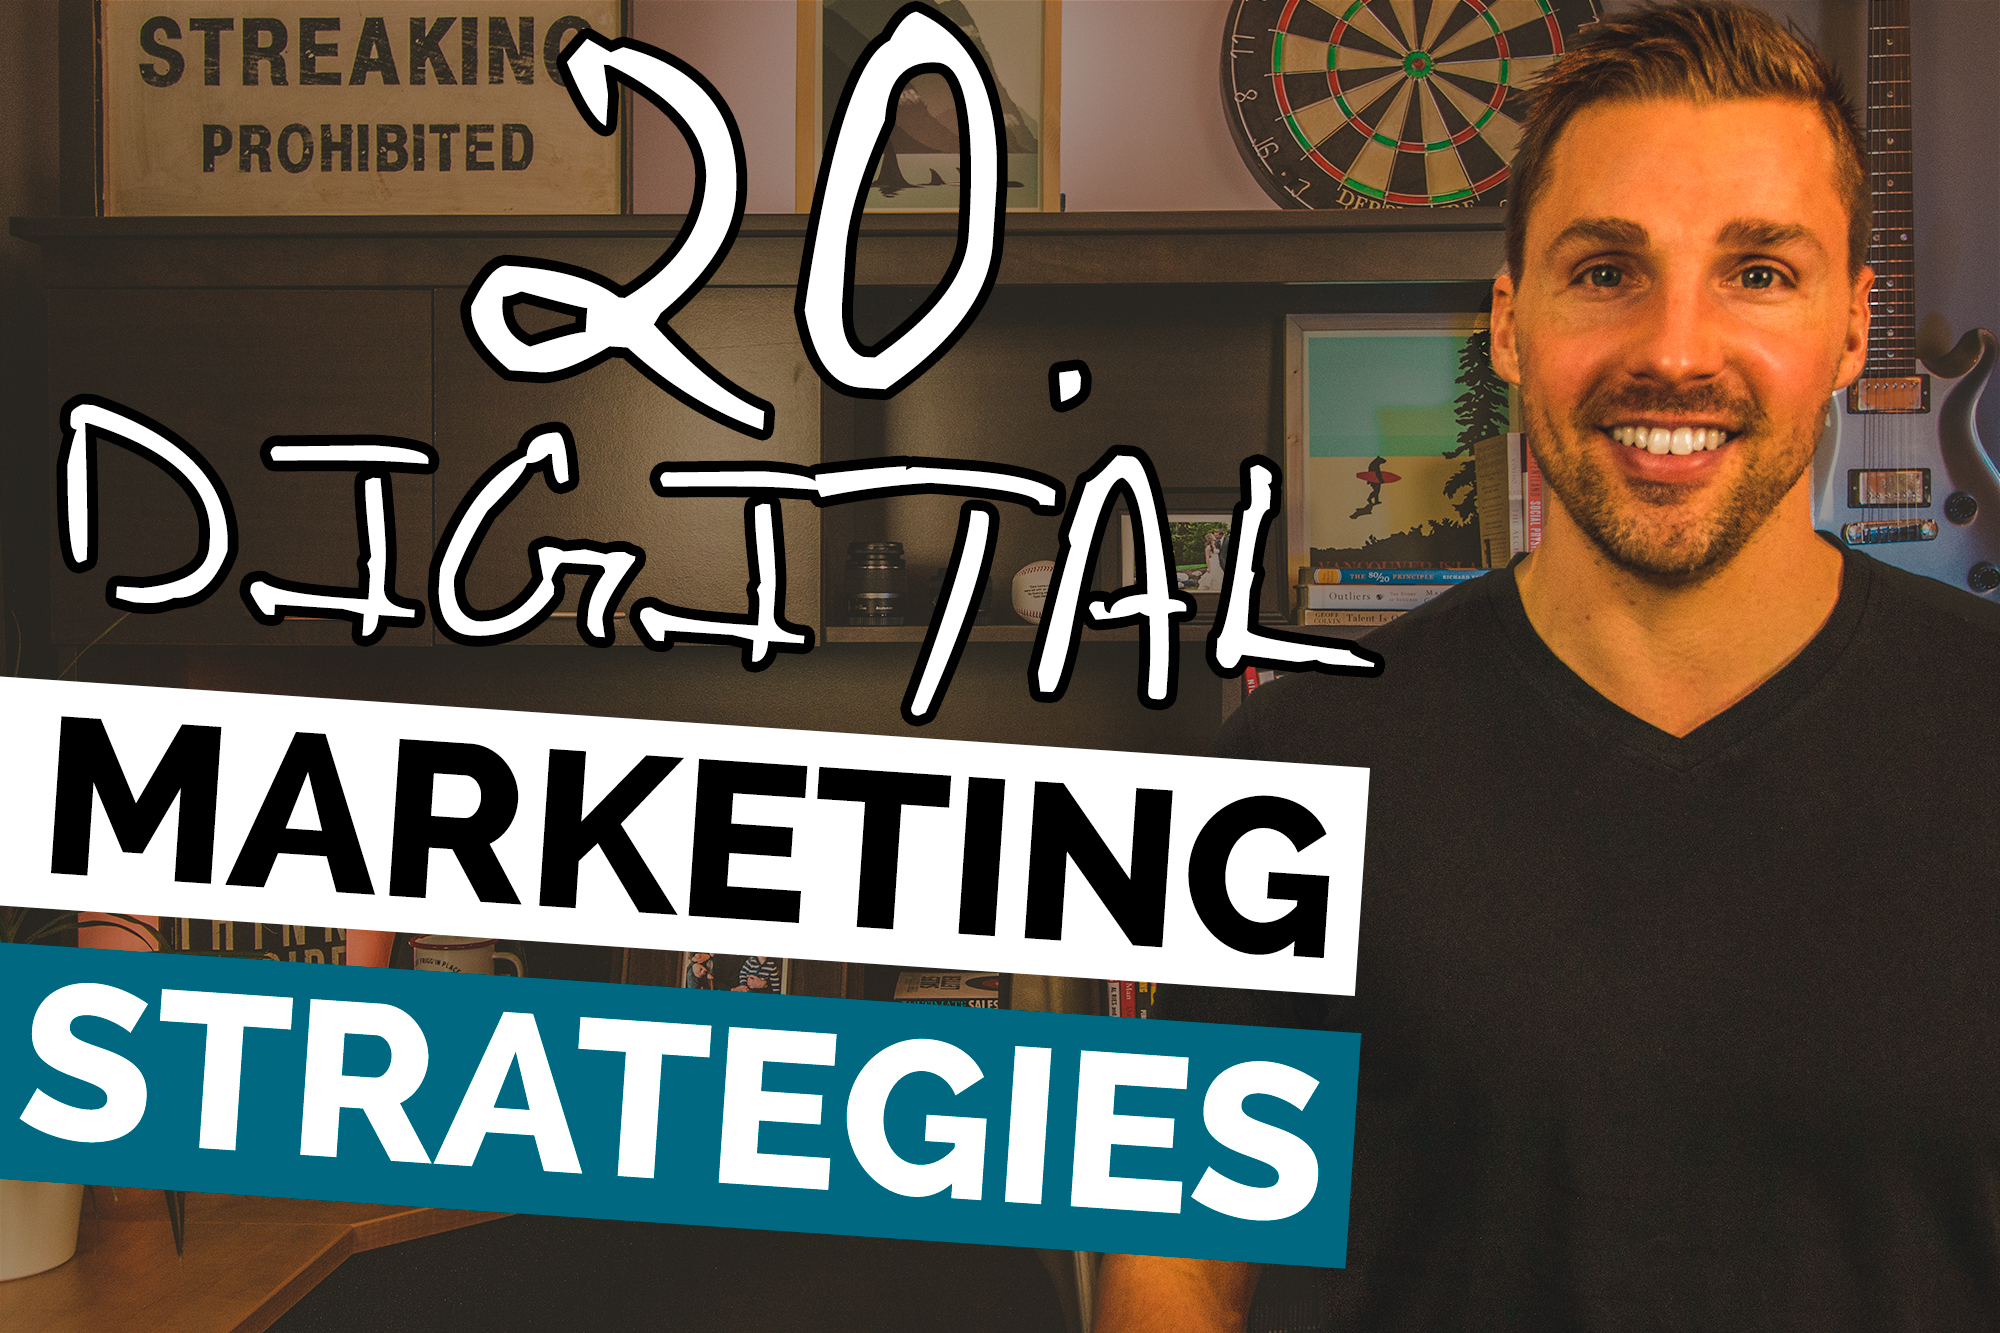 My Top 20 Digital Marketing Strategies For Small Business